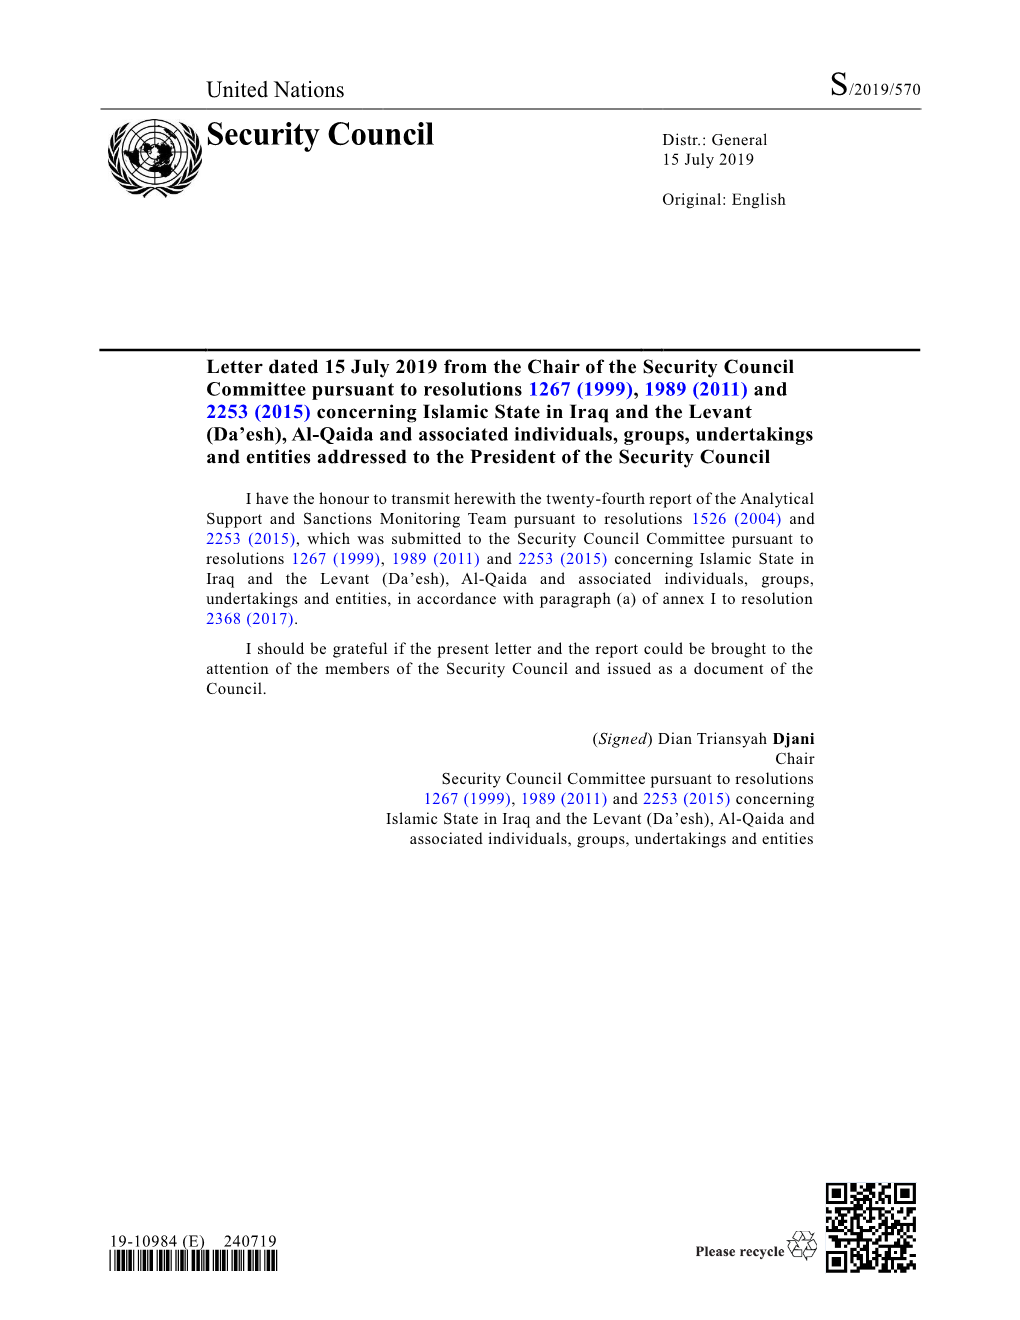 Letter Dated 15 July 2019 from the Chair of the Security Council